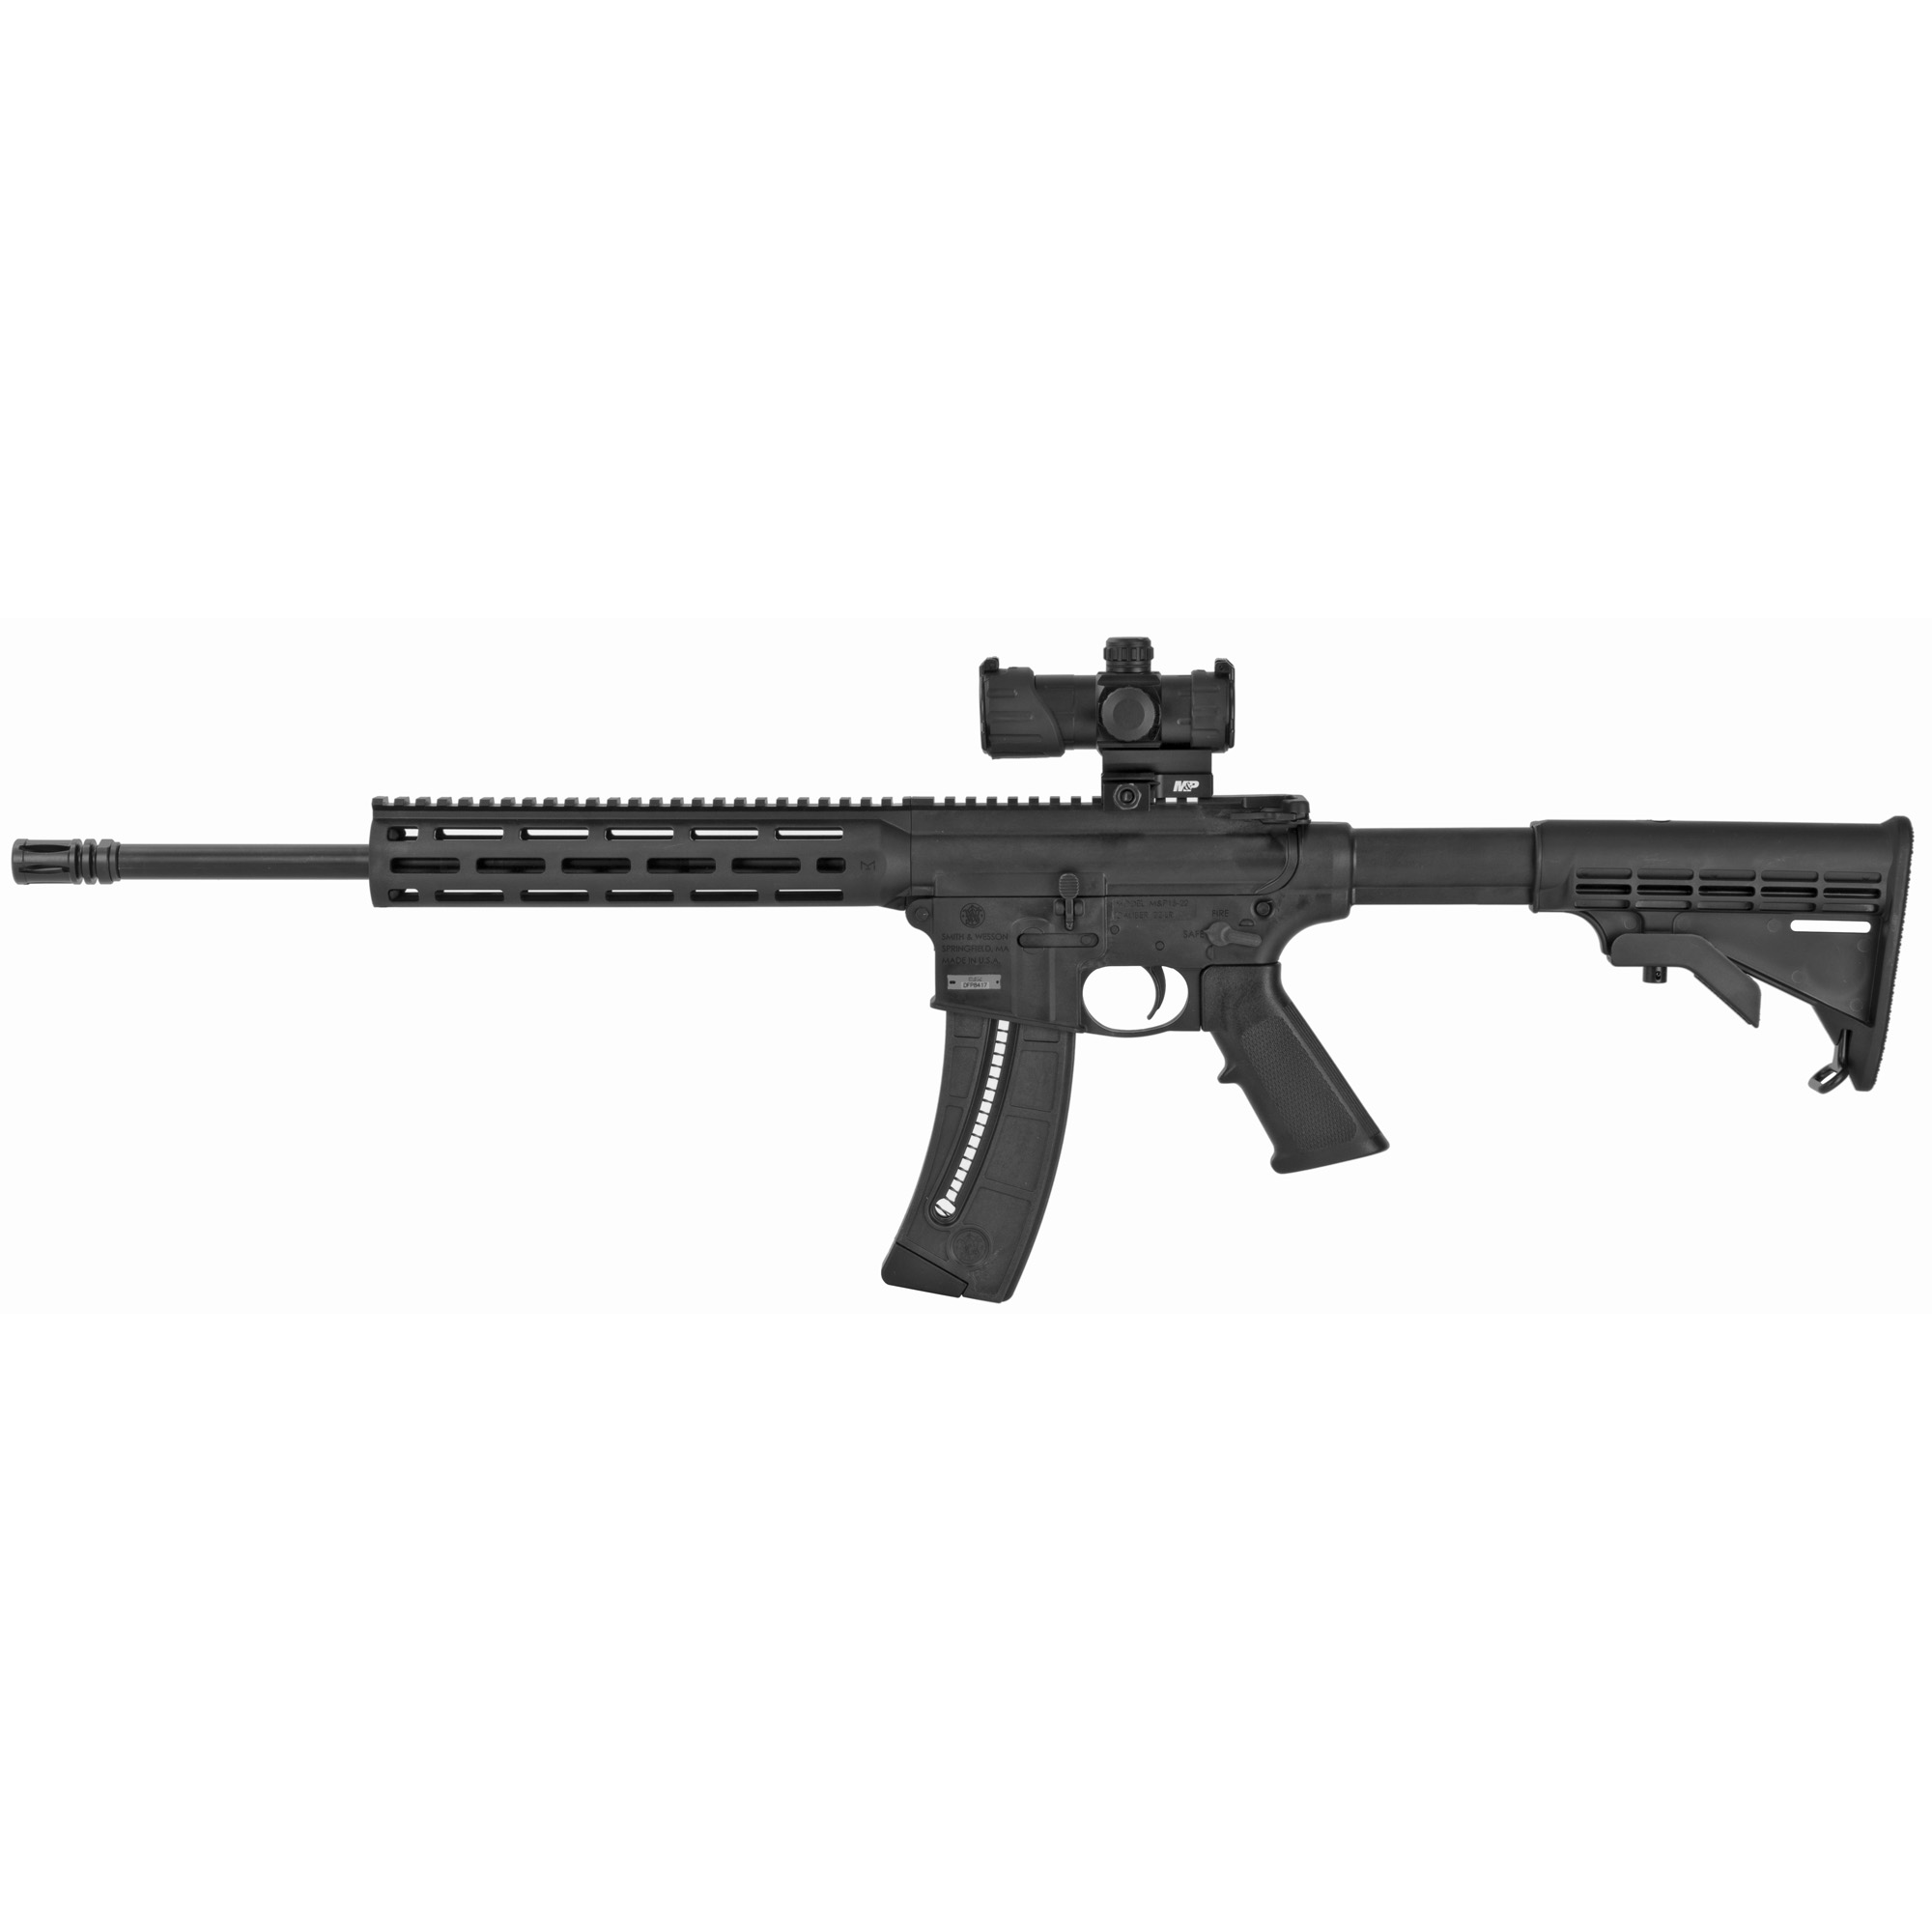 Smith & Wesson M&P15-22 Sport, 22LR Rifle, Black with Red-Green Dot Optic (12722)